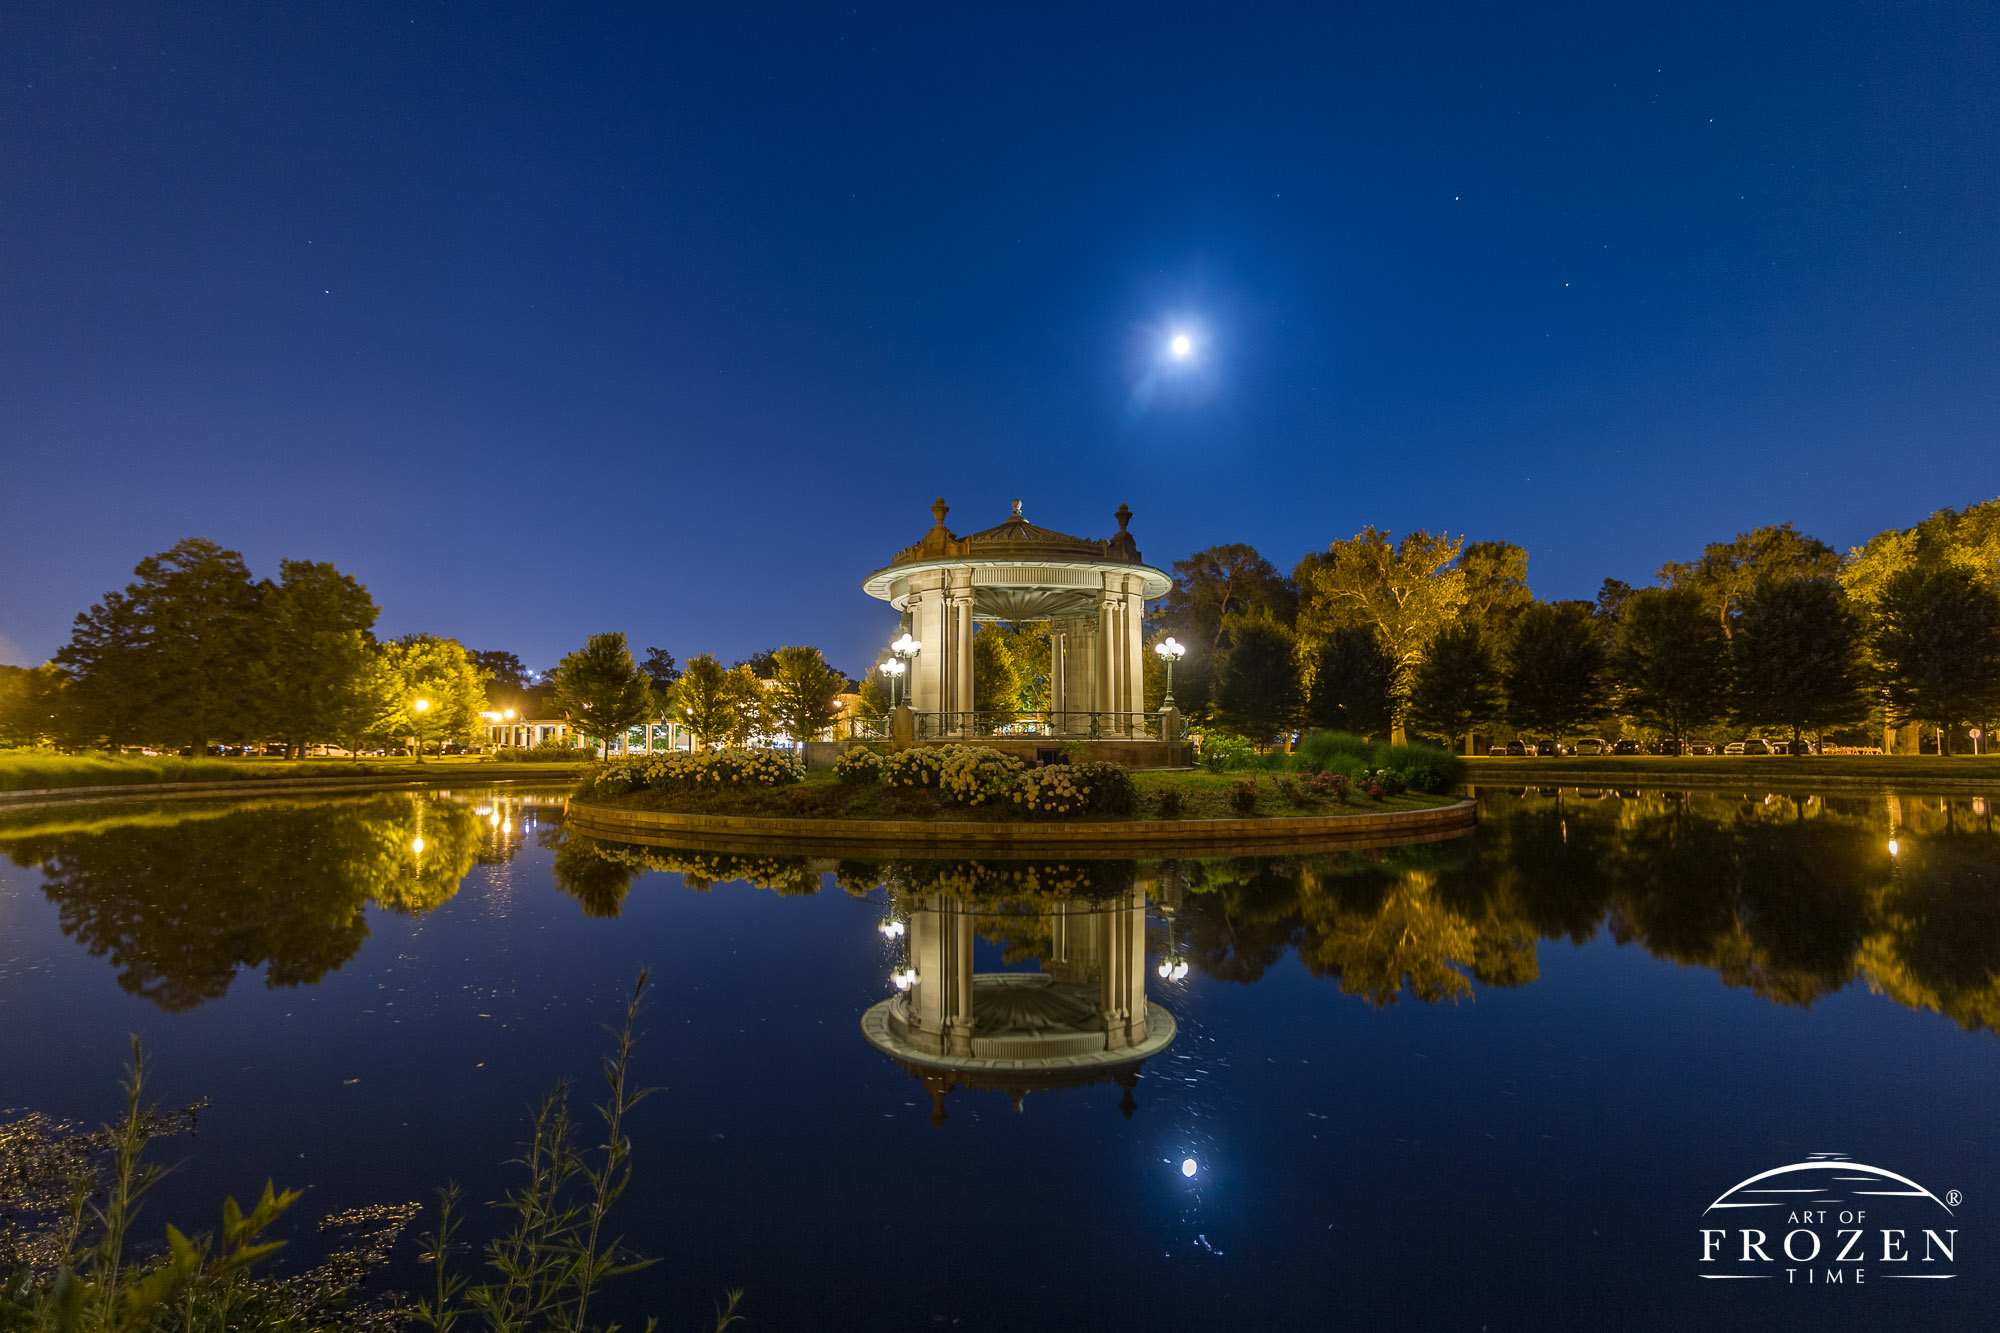 A nightscape of the Forest Park Nathan Frank Bandstand, in St Louis Missouri where a full moon hangs over the park and Pagoda lake reflects the sky above